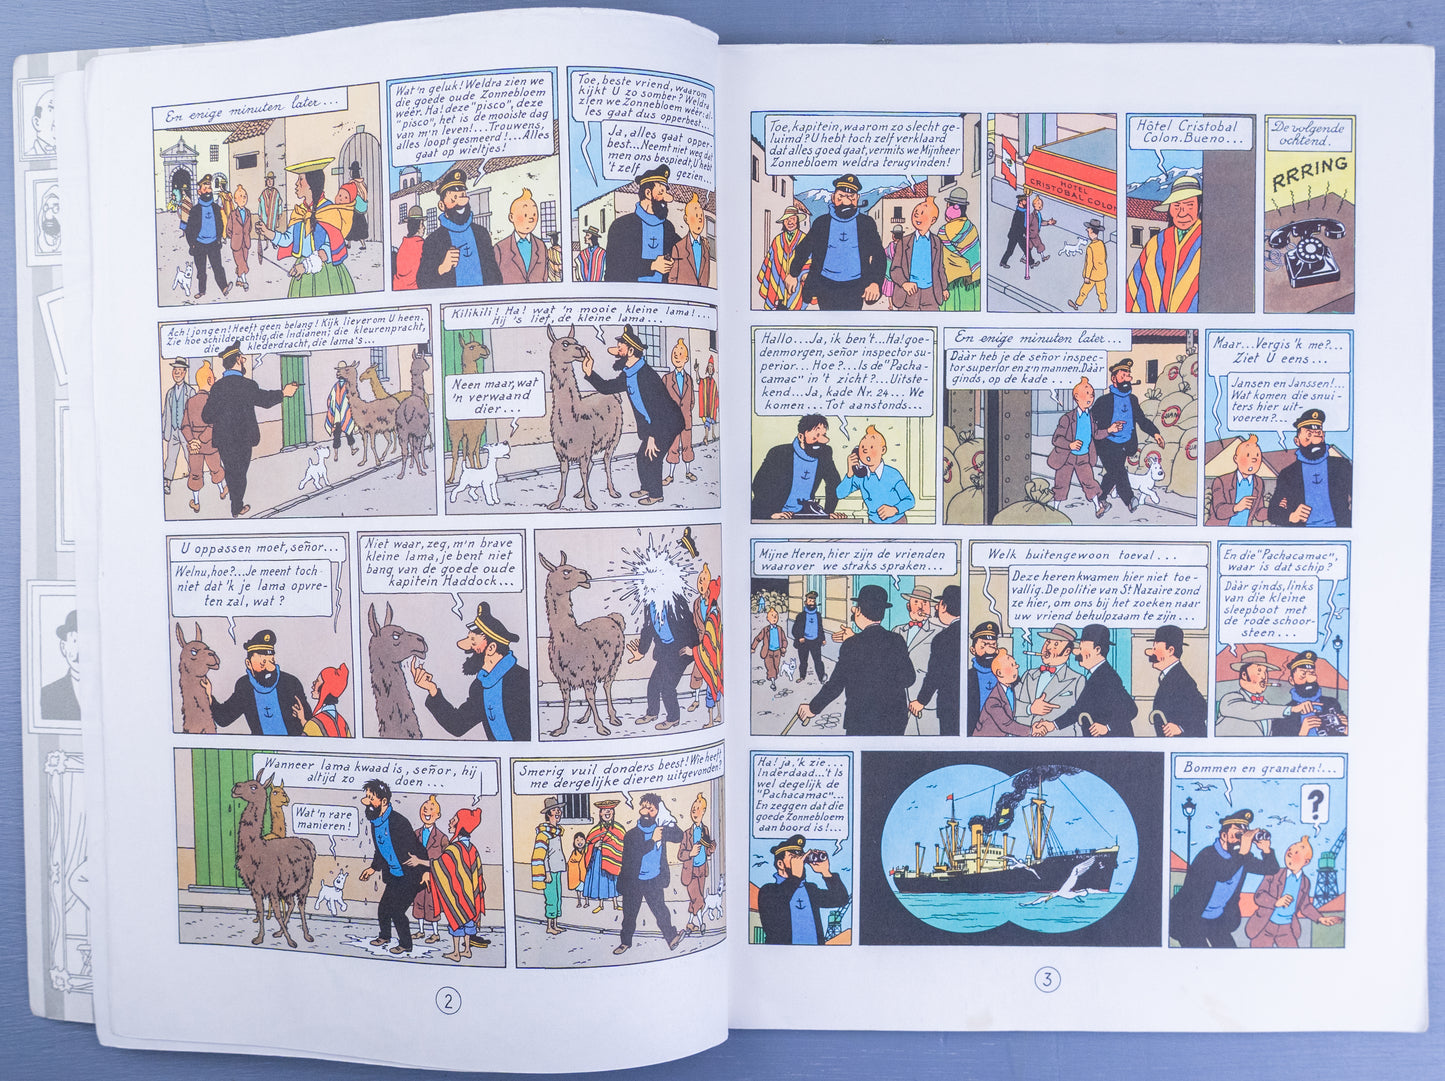 Kuifje: De Zonnetempel 1976 Early Dutch Paperback Edition Casterman Tintin by Herge